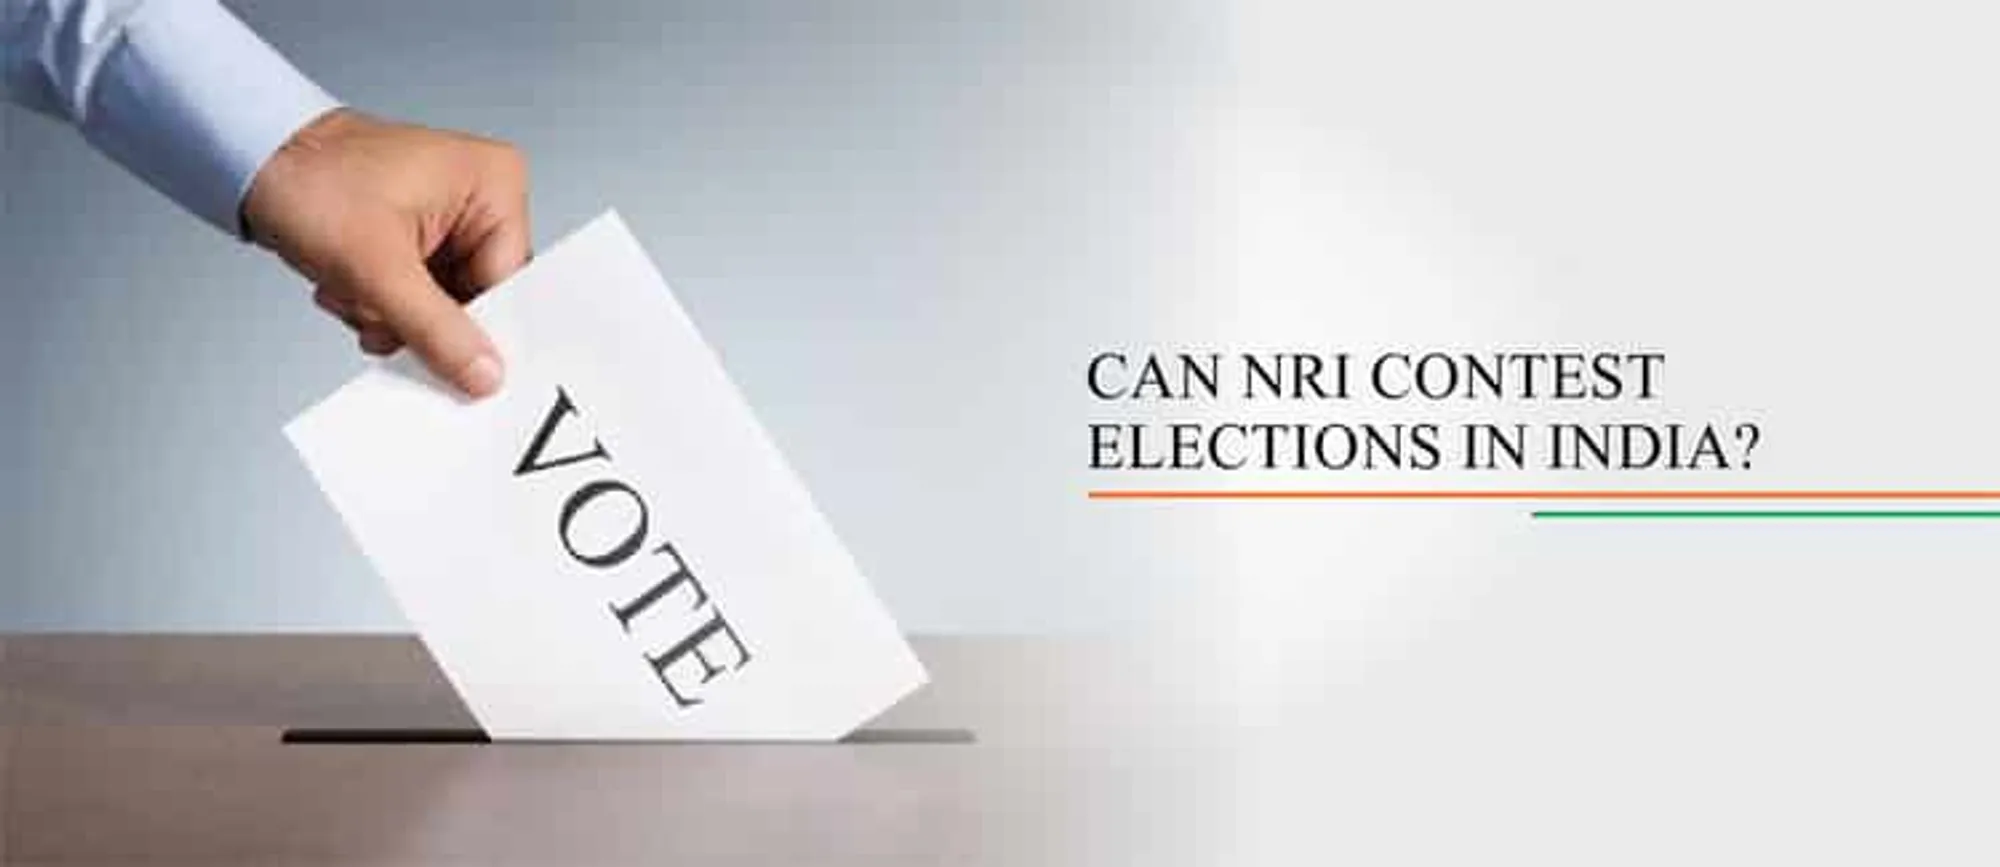 can nri contest elections in india